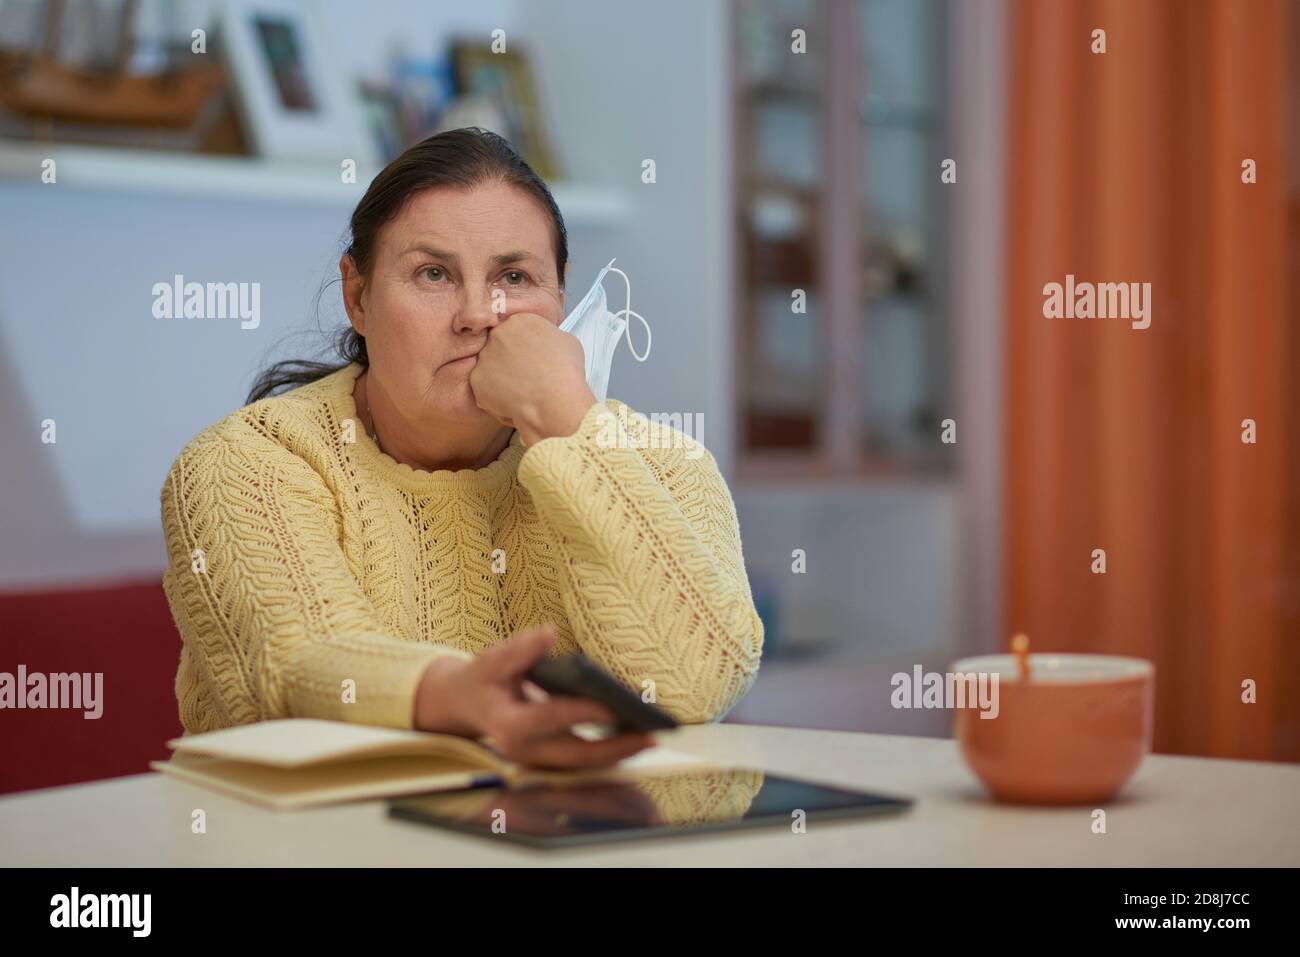 Sad senior woman in yellow sweater with mask and smart phone Stock Photo